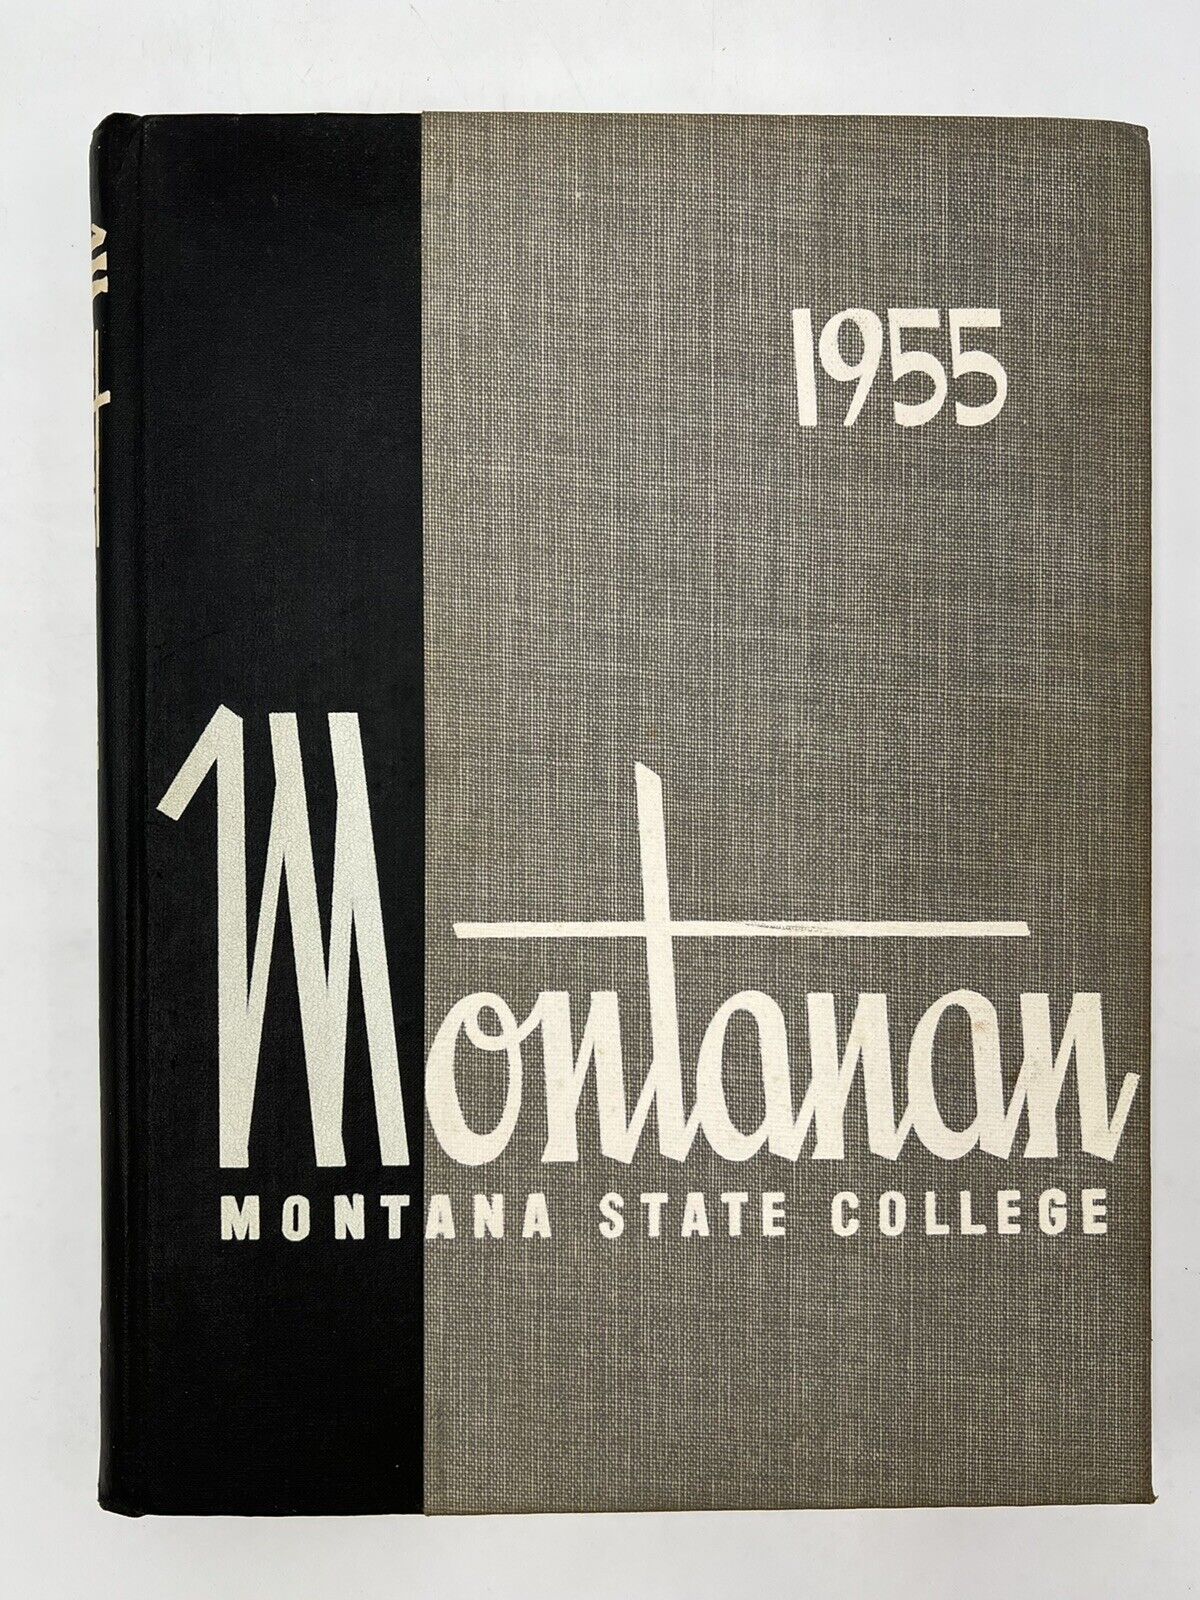 1955 Montanan Hardcover Yearbook Montana State College “UNMARKED “